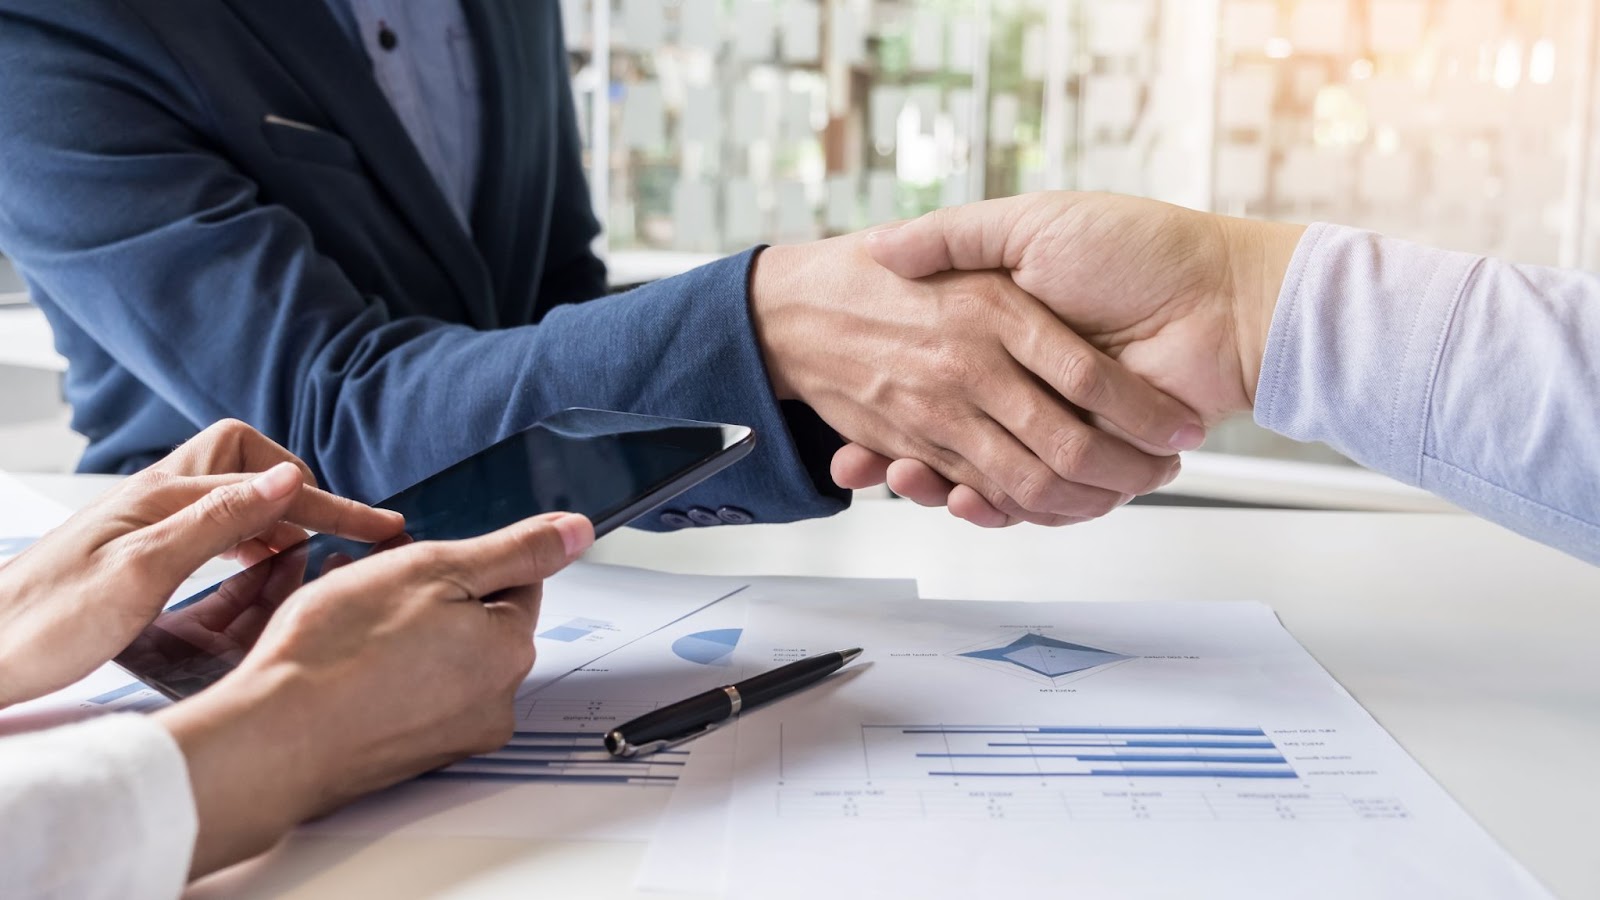 business-handshake-of-two-men-demonstrating-their-agreement-to-sign-agreement-or-contract-between-their-firms-companies-enterprises.jpg